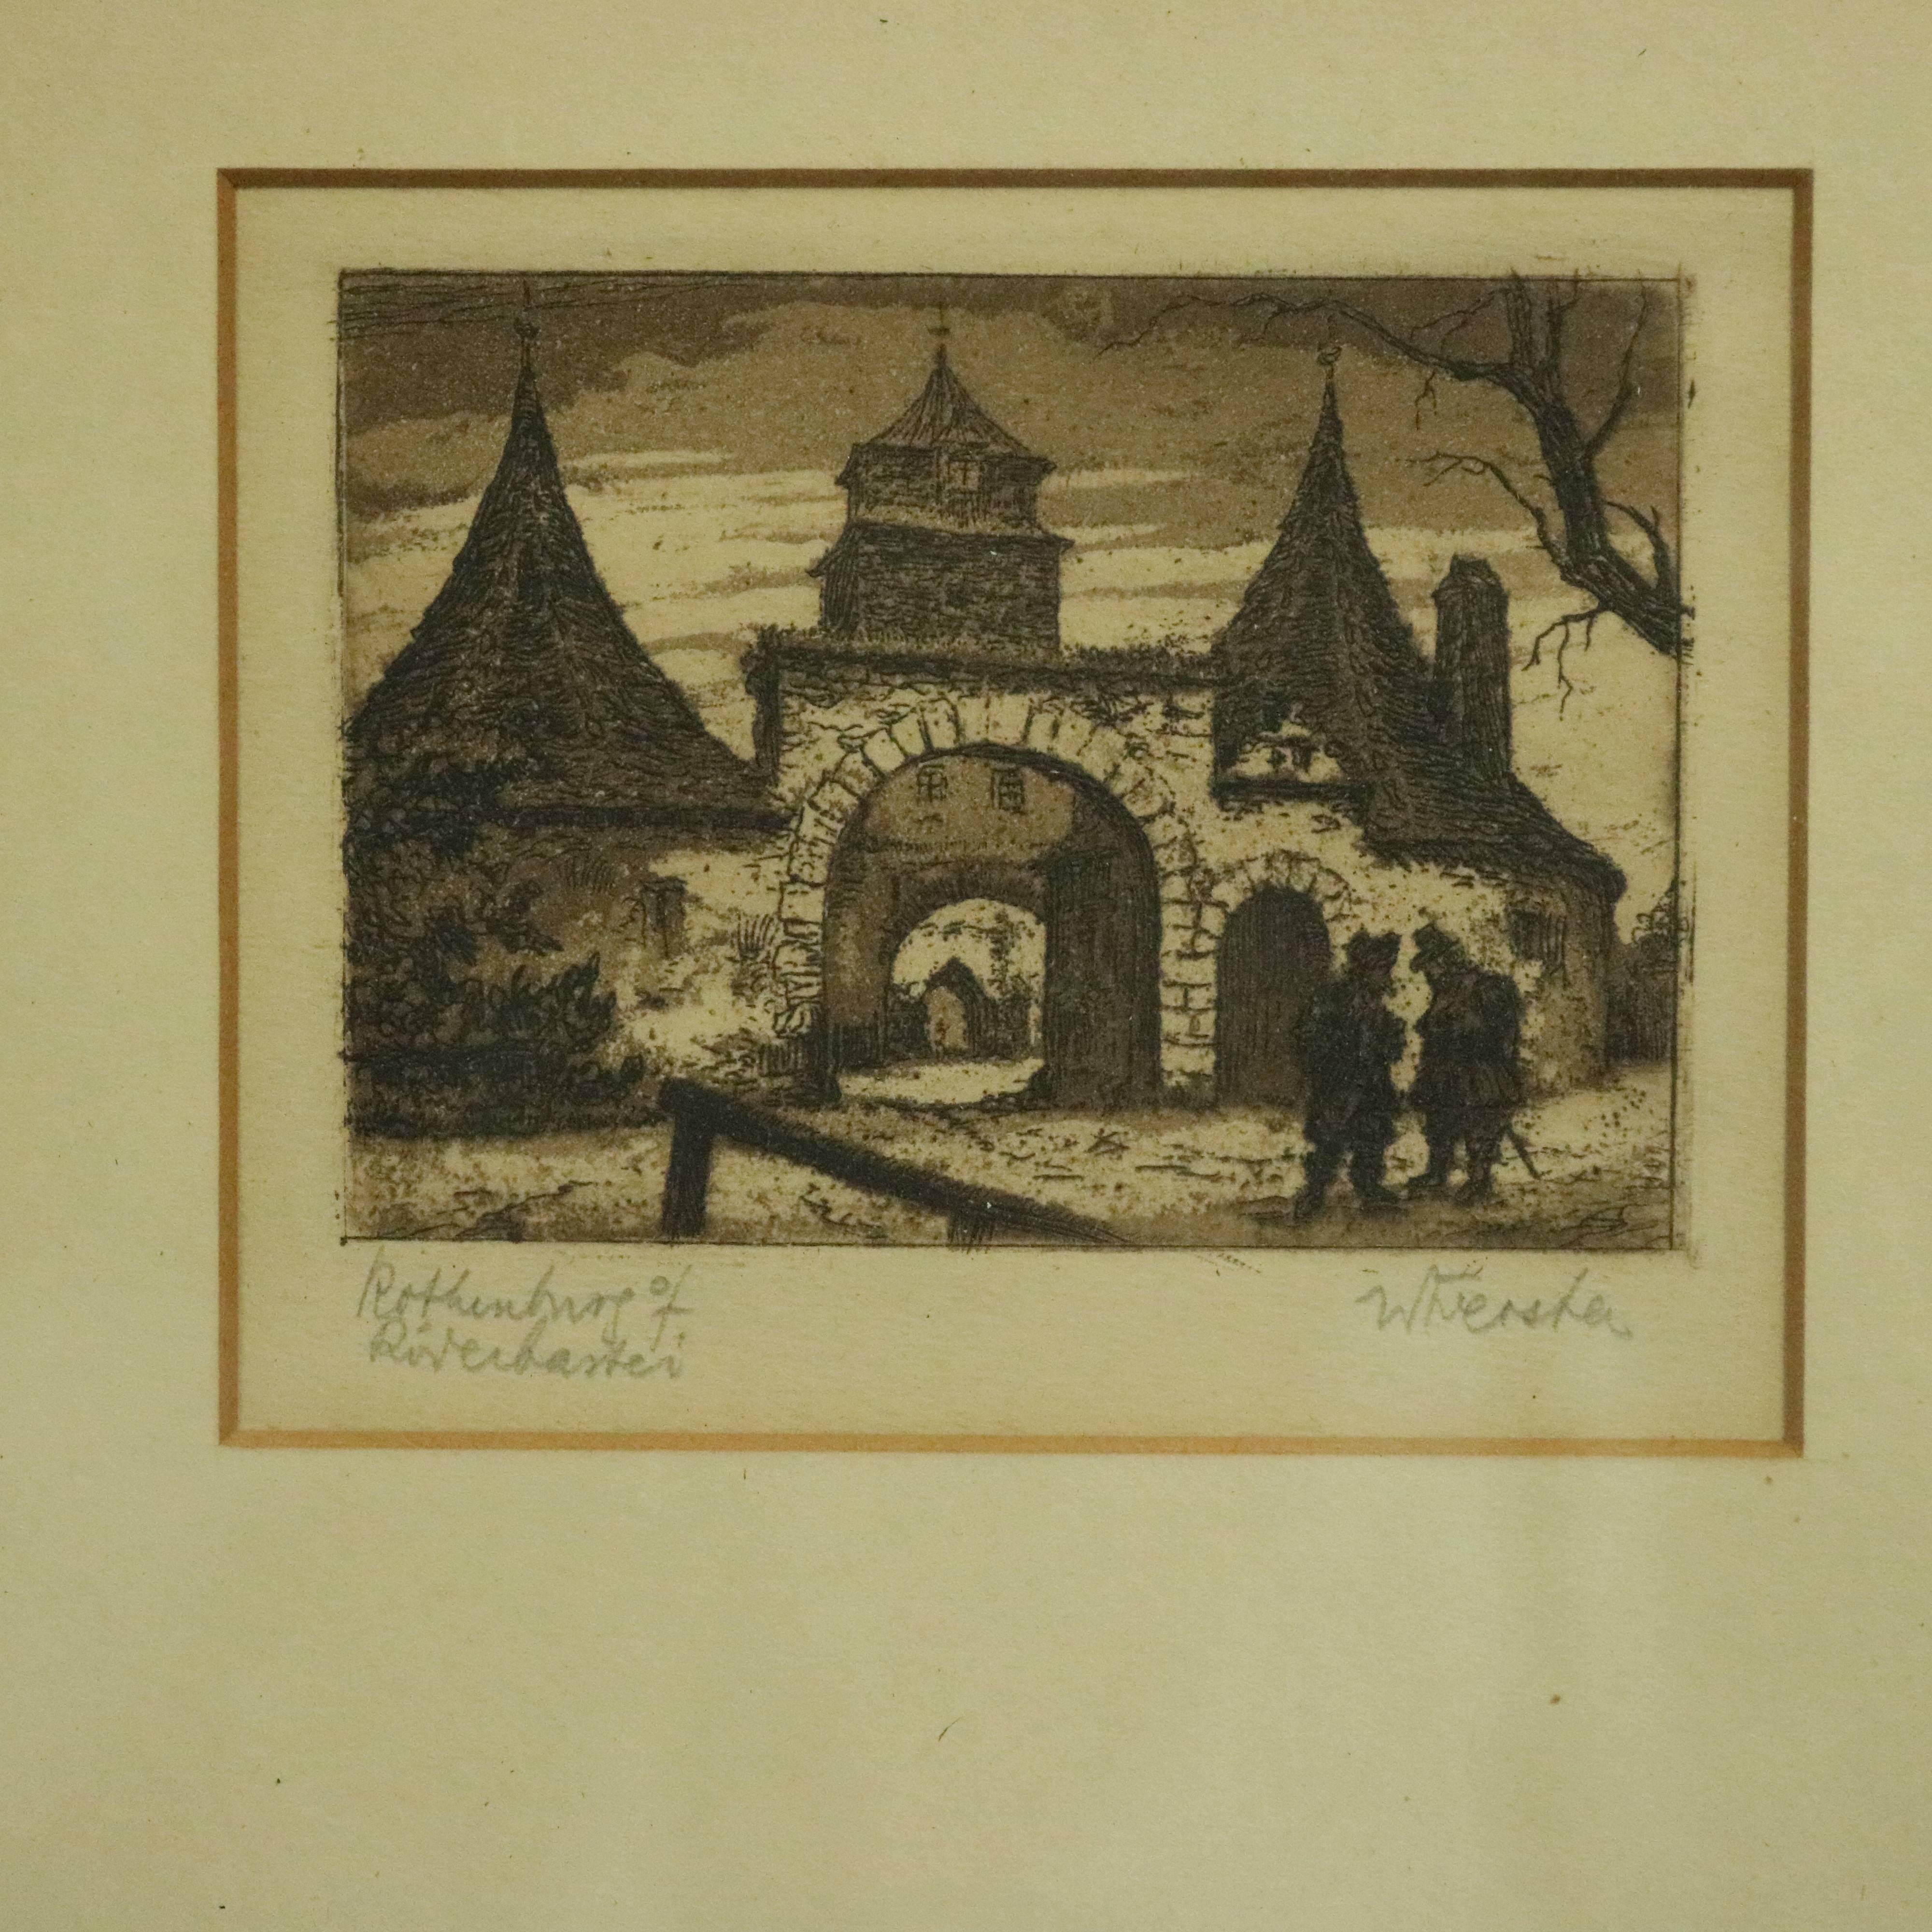 Antique miniature artist signed sepia etching of Rothenburg ob der Tauber town square Rothenburg, Germany, medieval gate, pencil titled lower right, pencil signed lower left, circa 1860.

Measures: 9.5